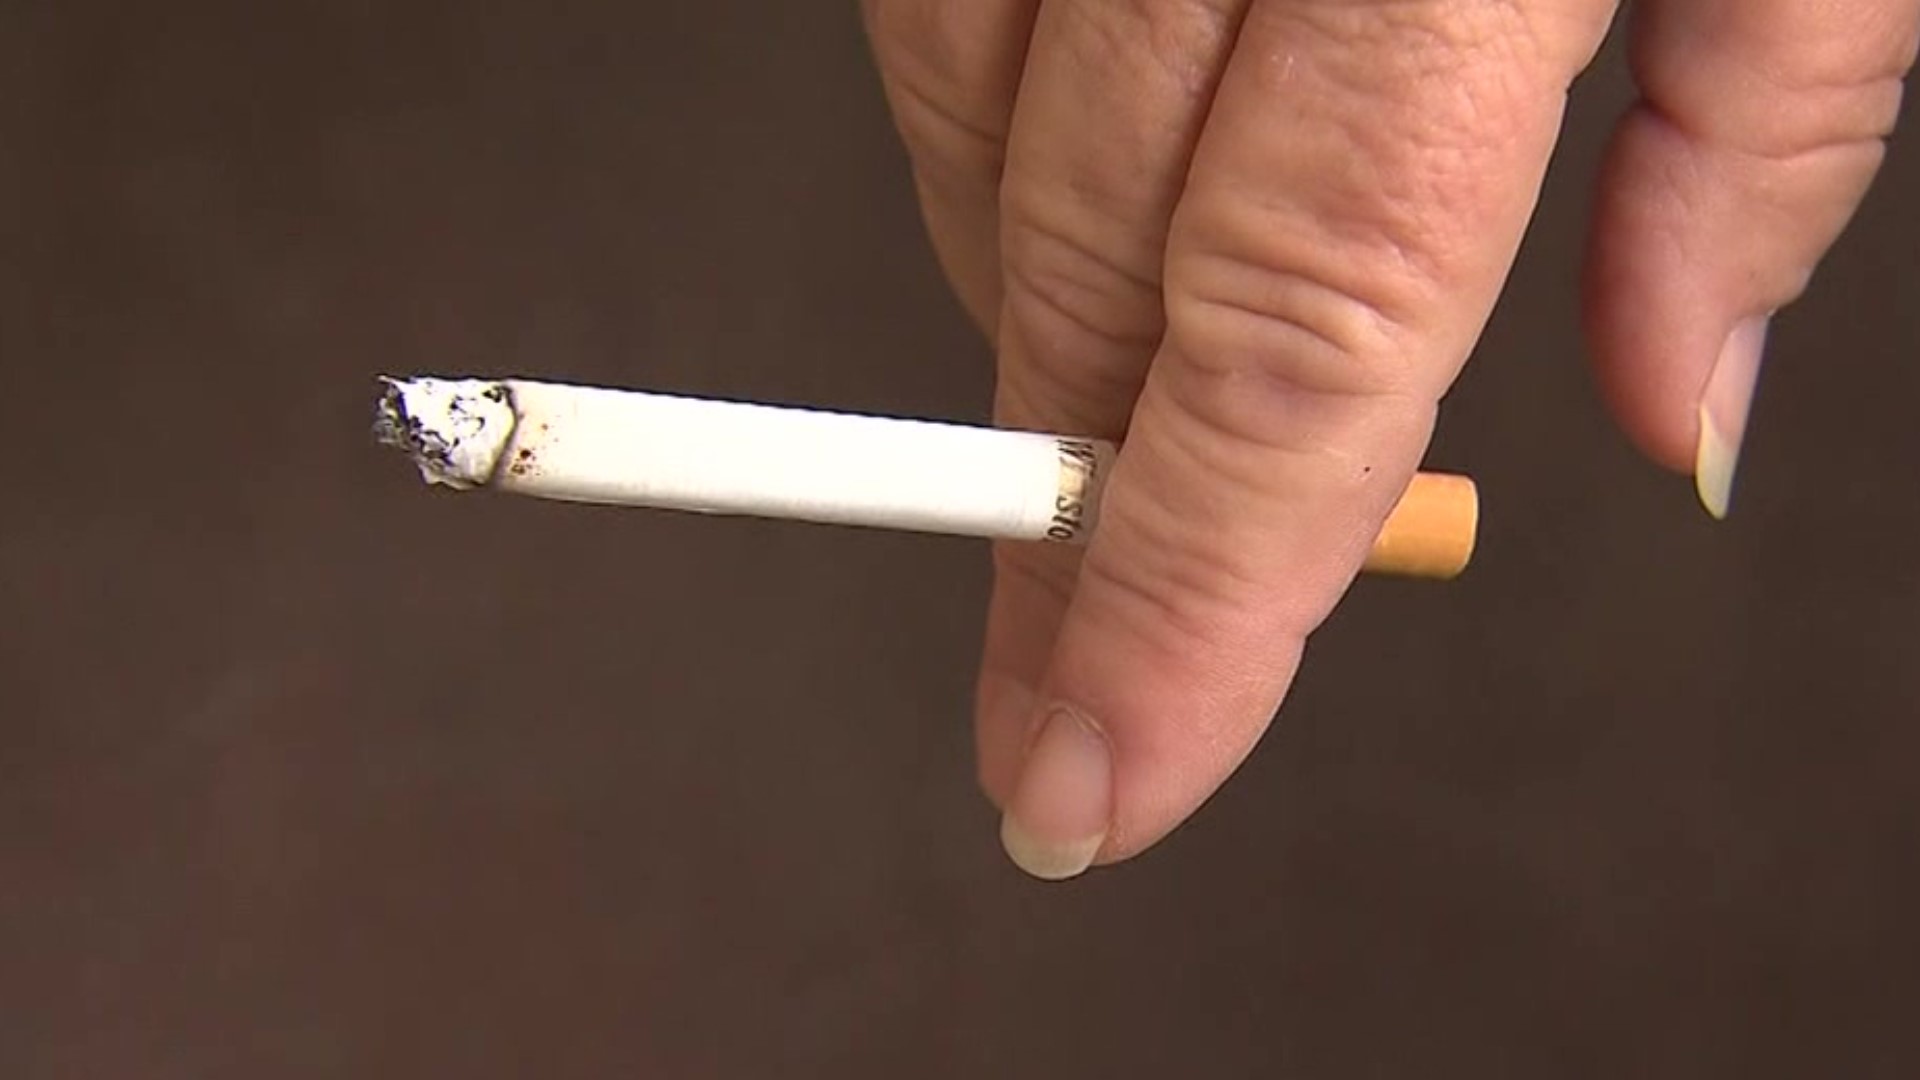 School nurses and an anti-smoking group are teaming up to stomp out smoking this school year.